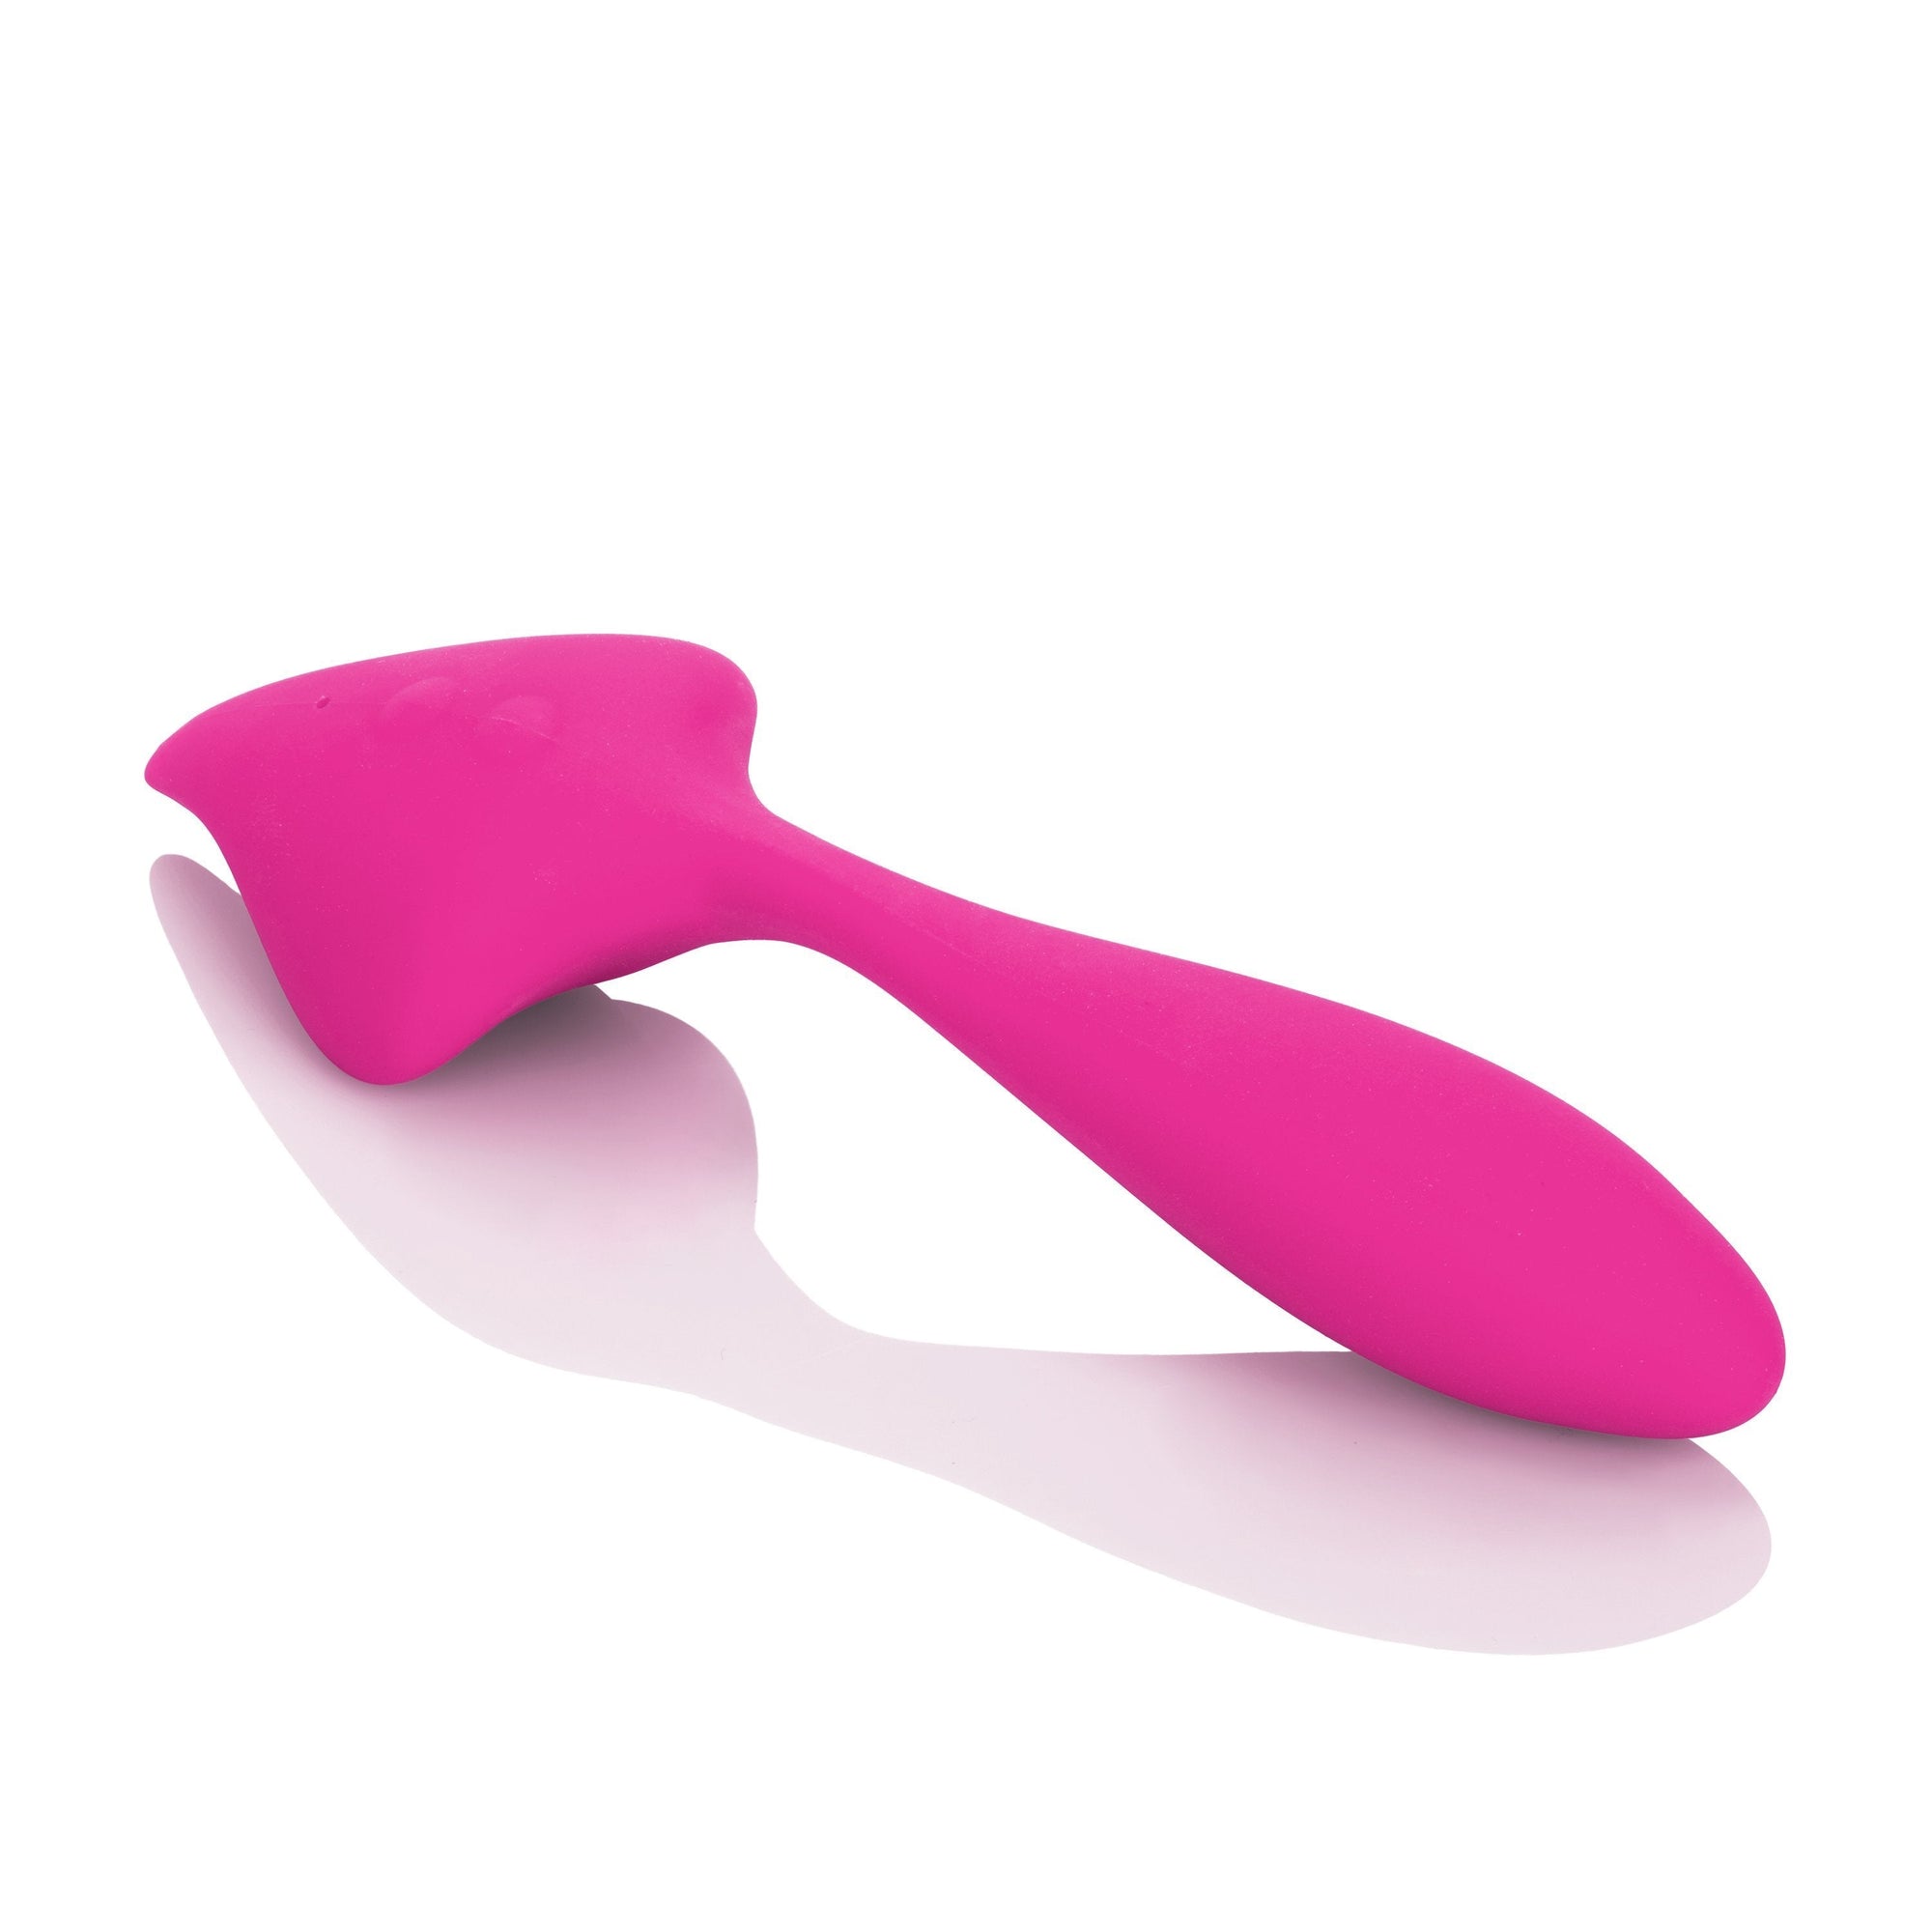 California Exotics - Mini Marvels Silicone Marvelous Lover Clit Massager (Pink) -  Clit Massager (Vibration) Rechargeable  Durio.sg